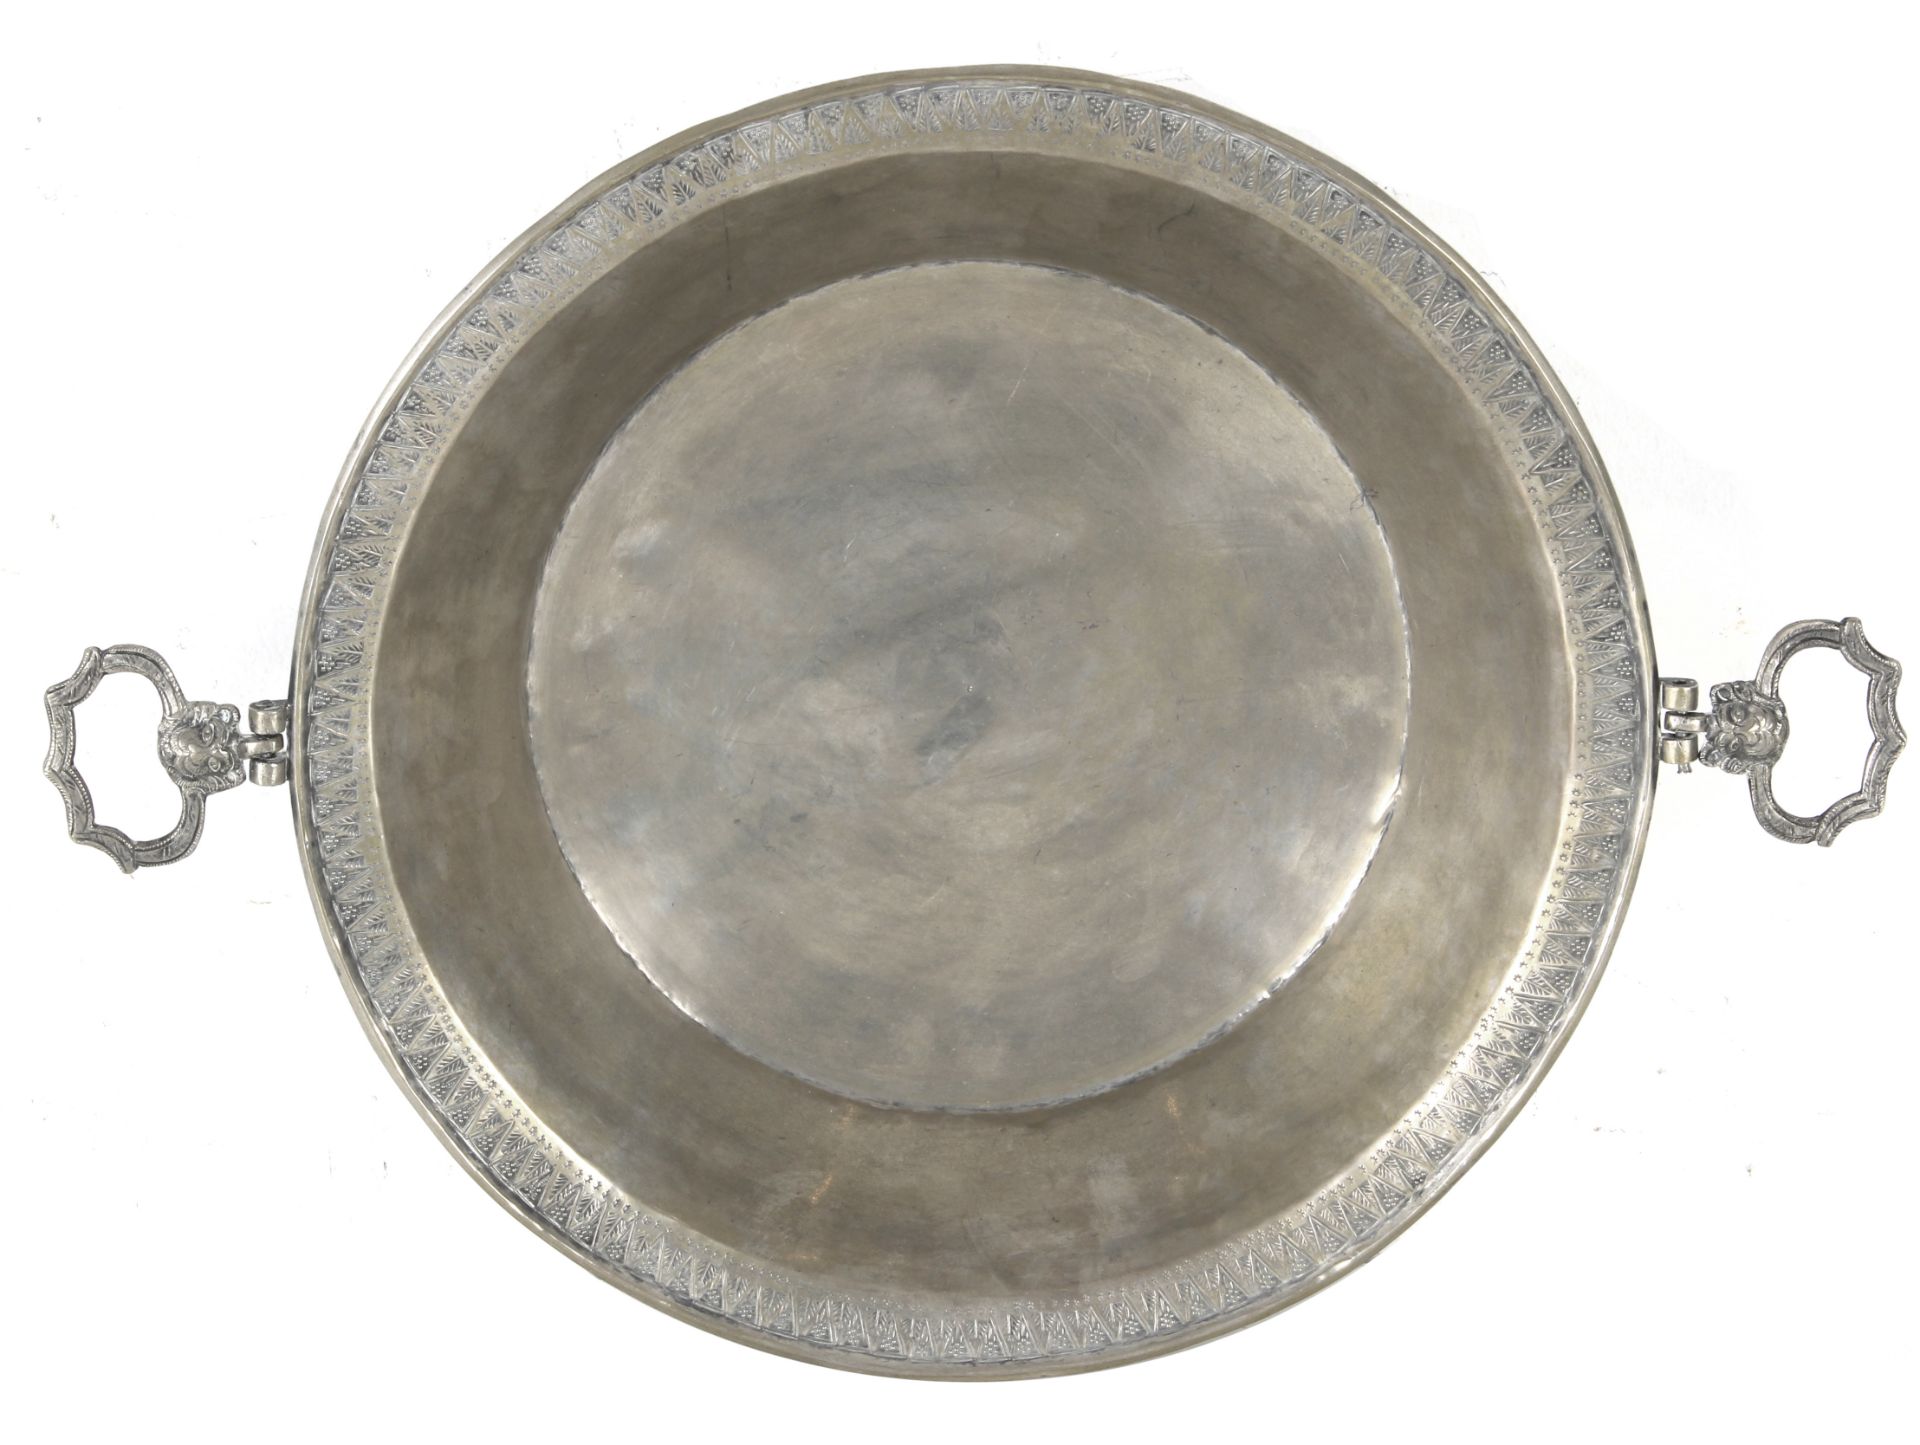 Early 20th century silver Colonial brazier from the Viceroyalty of Peru